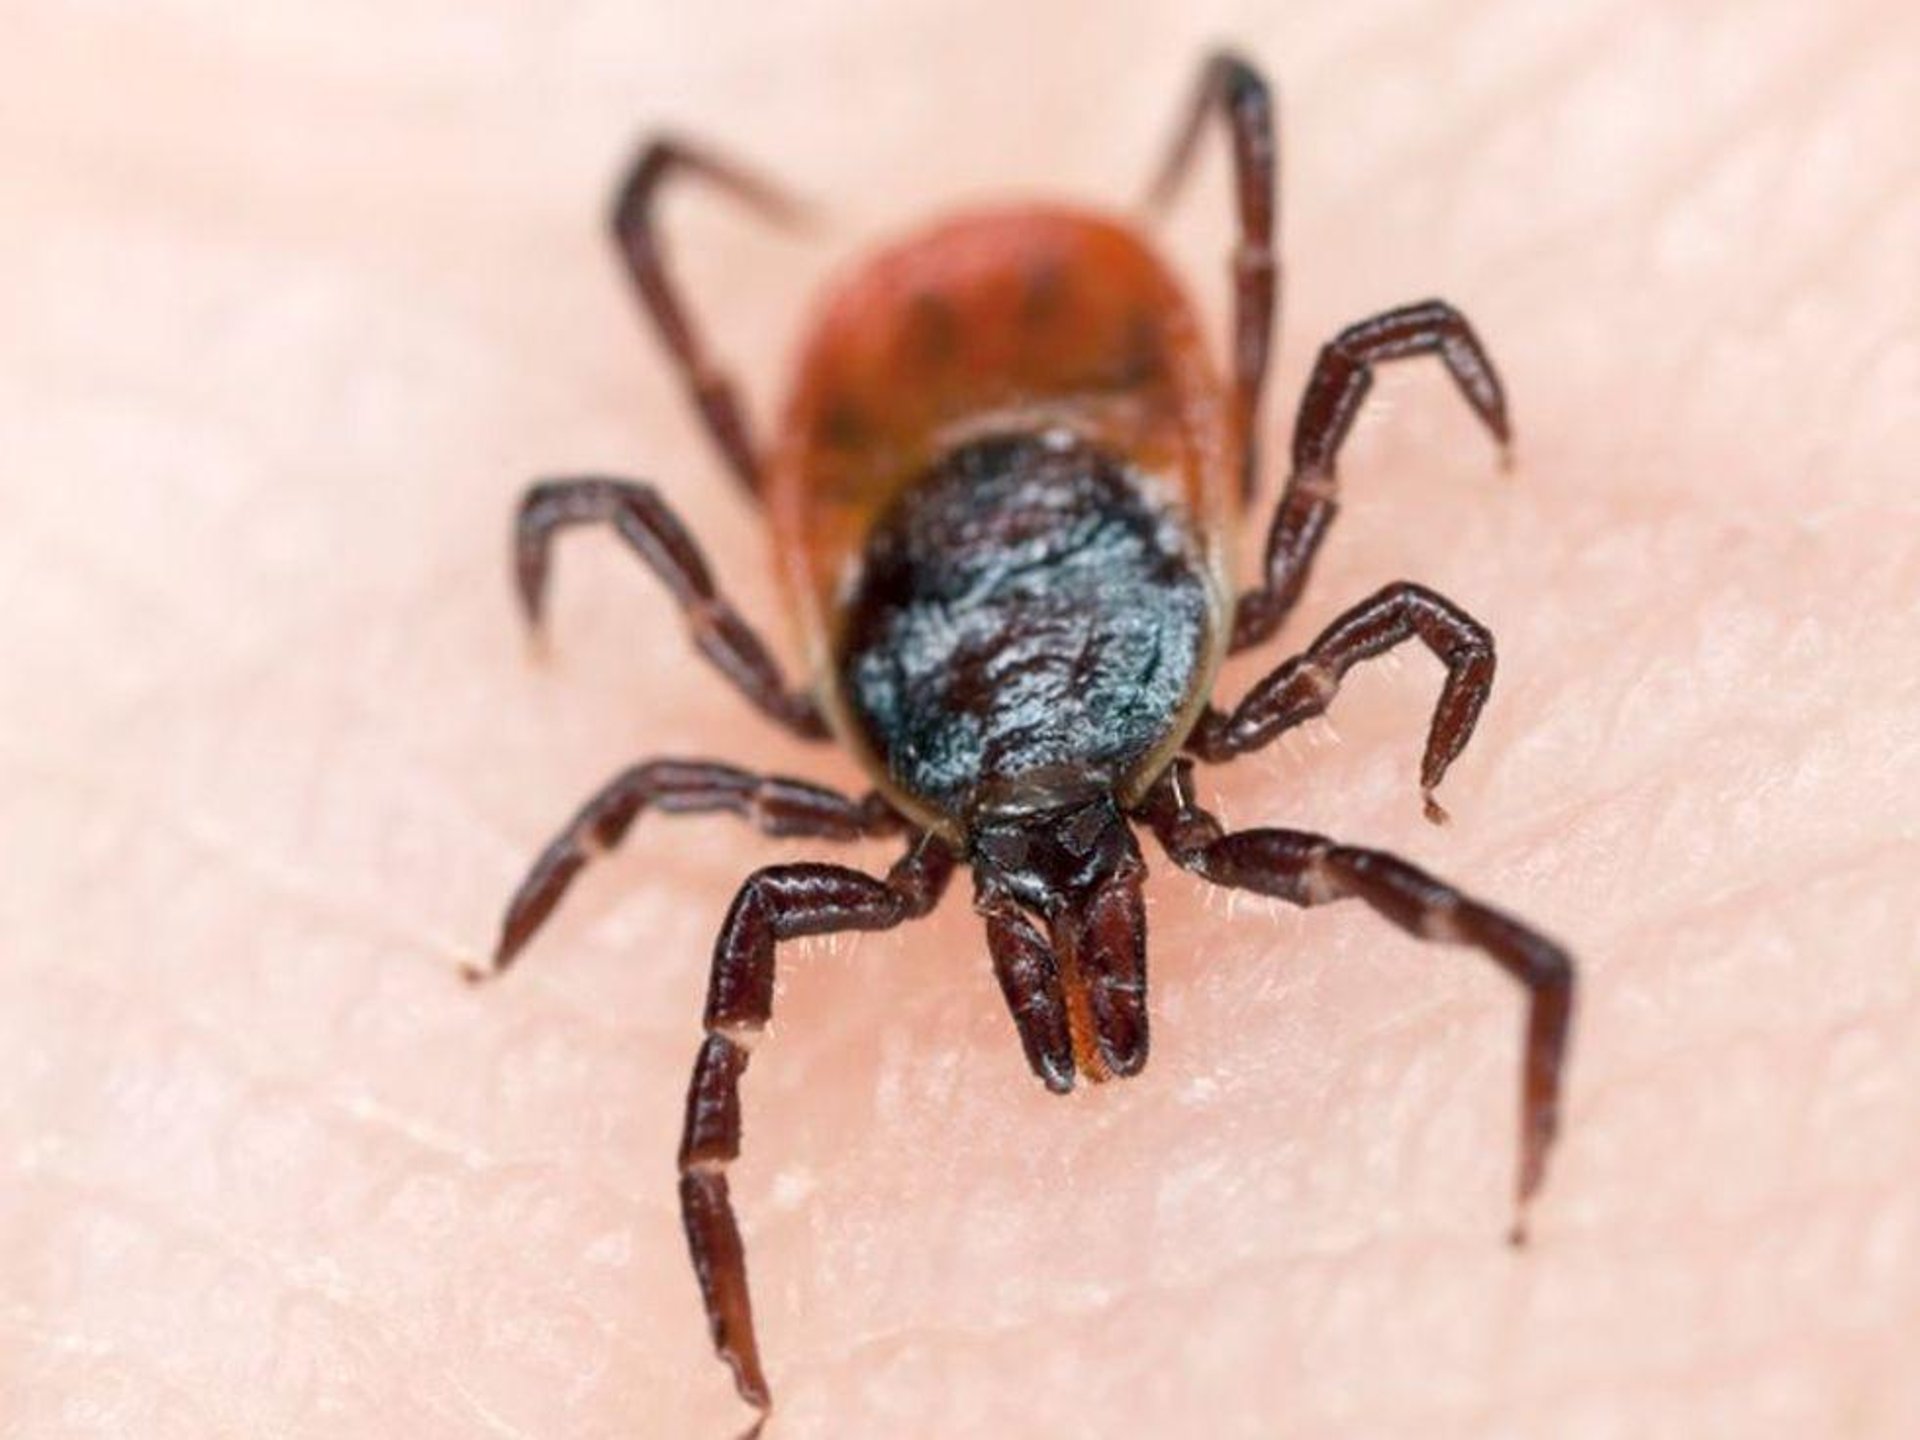 News Picture: Tick-Borne Powassan Virus Can Kill. What Is It, and How Can You Protect Yourself?